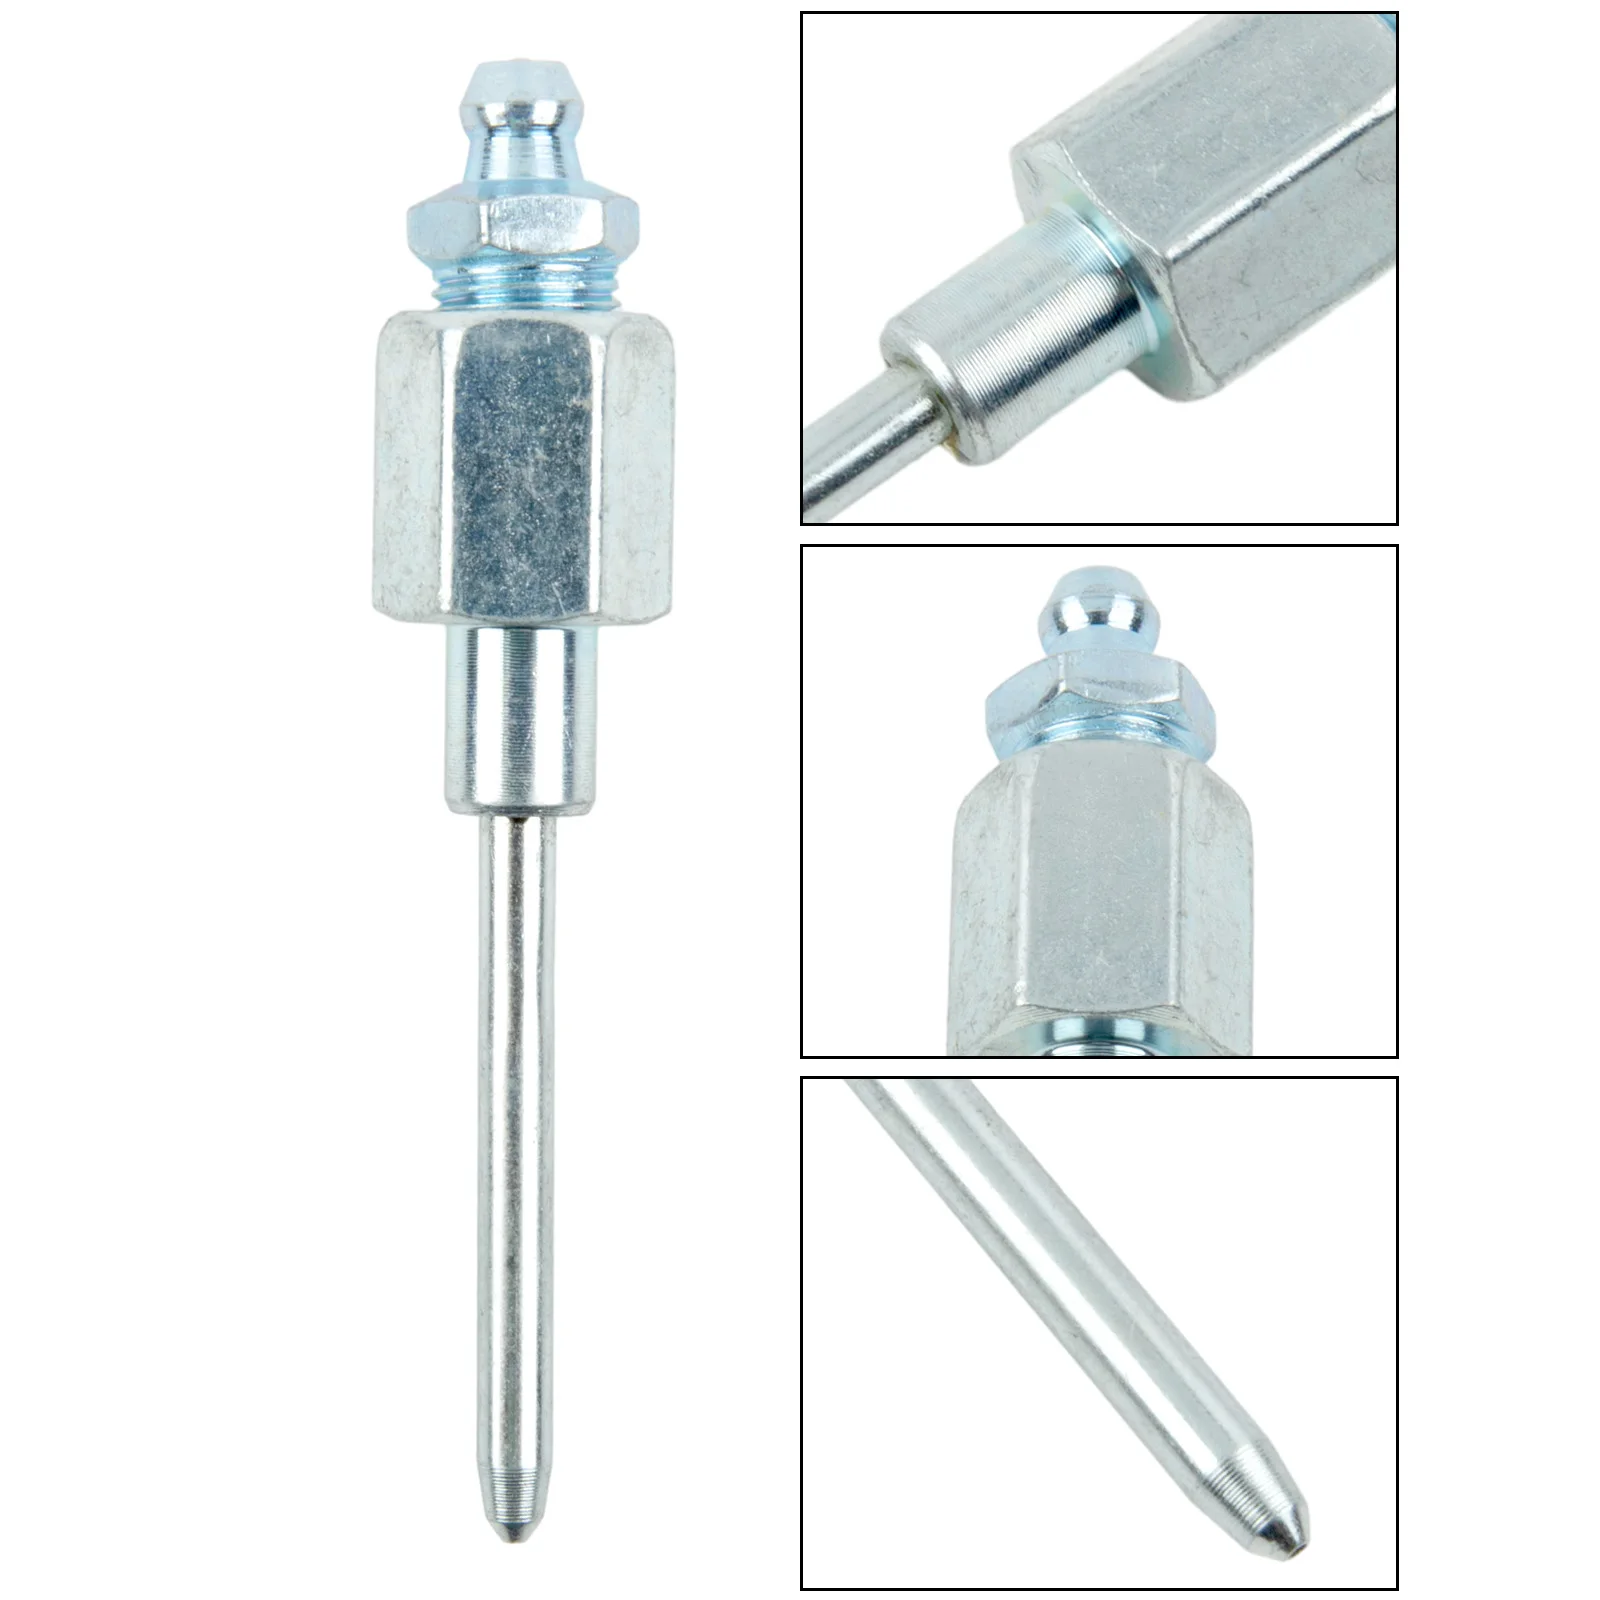 

1pc Grease Injector Needle For Grease Gun Needle Tip Fitting Holder Joints Bearings Grease Tool Dispenser Nozzle Adaptor